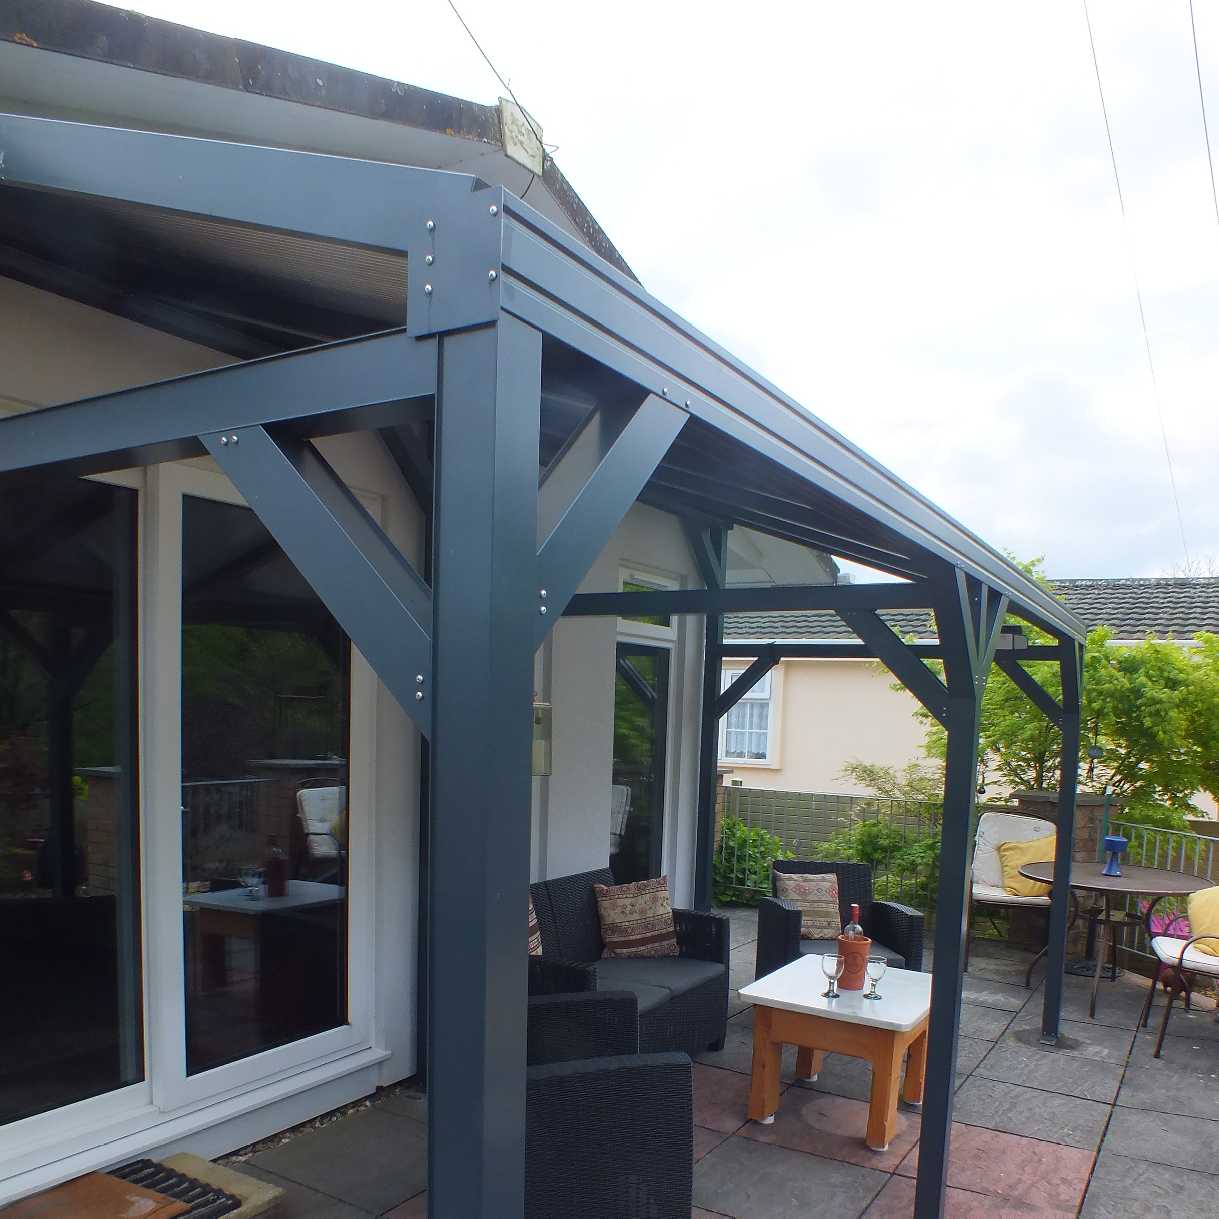 Affordable Omega Smart Free-Standing, Anthracite Grey MonoPitch Roof Canopy with 16mm Polycarbonate Glazing - 6.3m (W) x 2.0m (P), (8) Supporting Posts